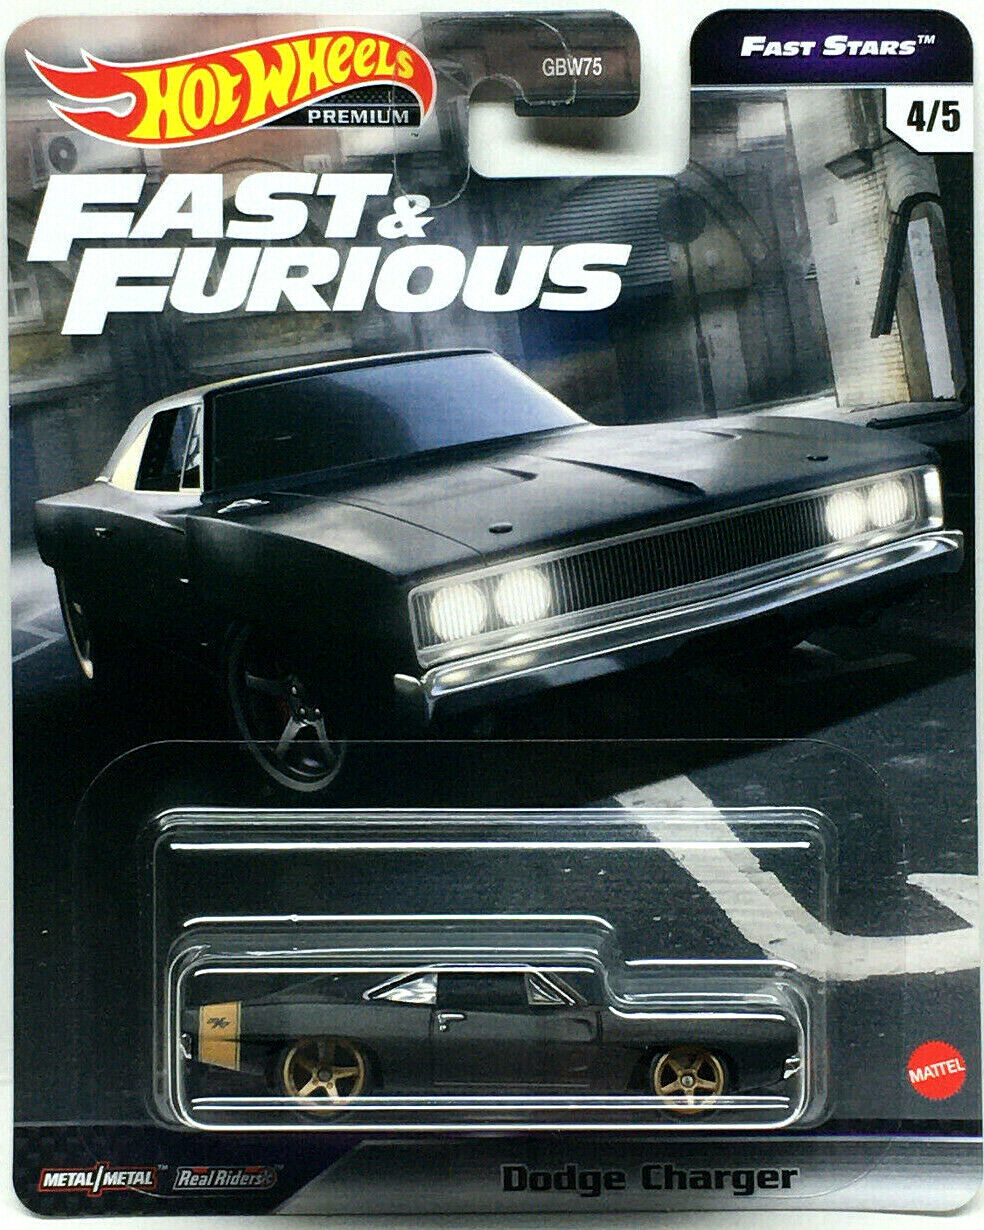 Hot Wheels Premium Fast & Furious Fast Stars Dodge Charger